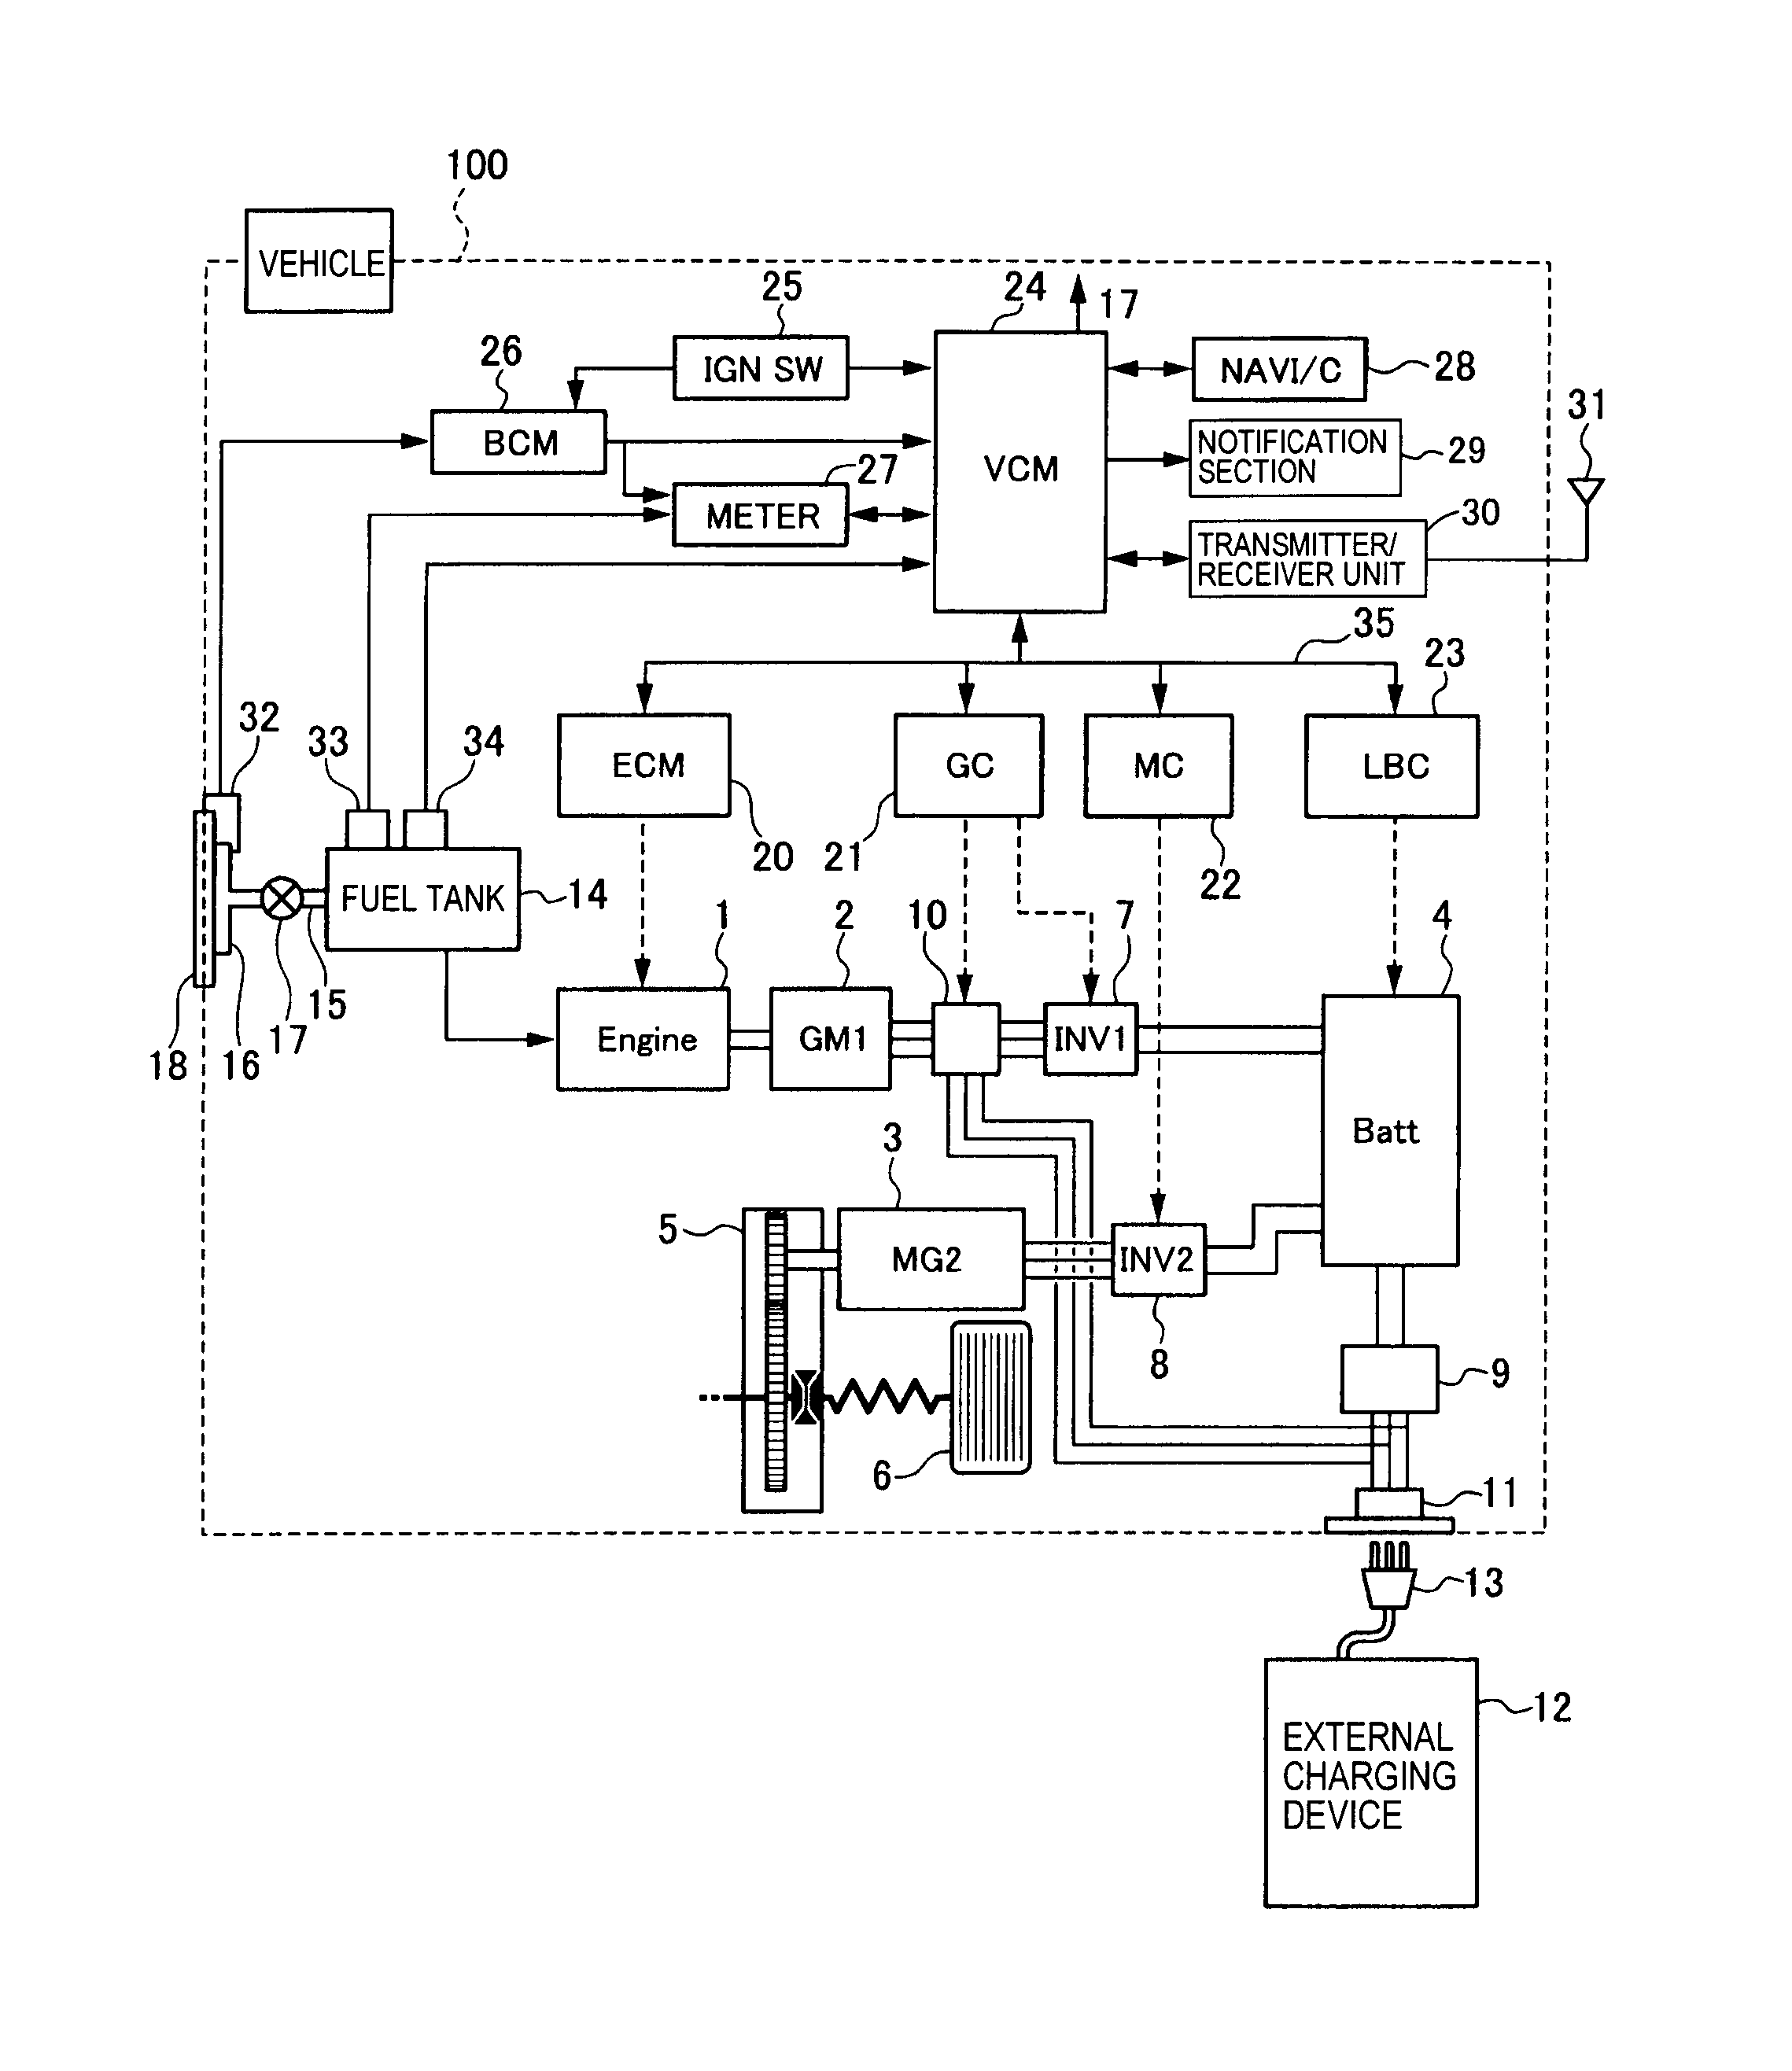 wiring diagram for a stihl fs 62 weedeater